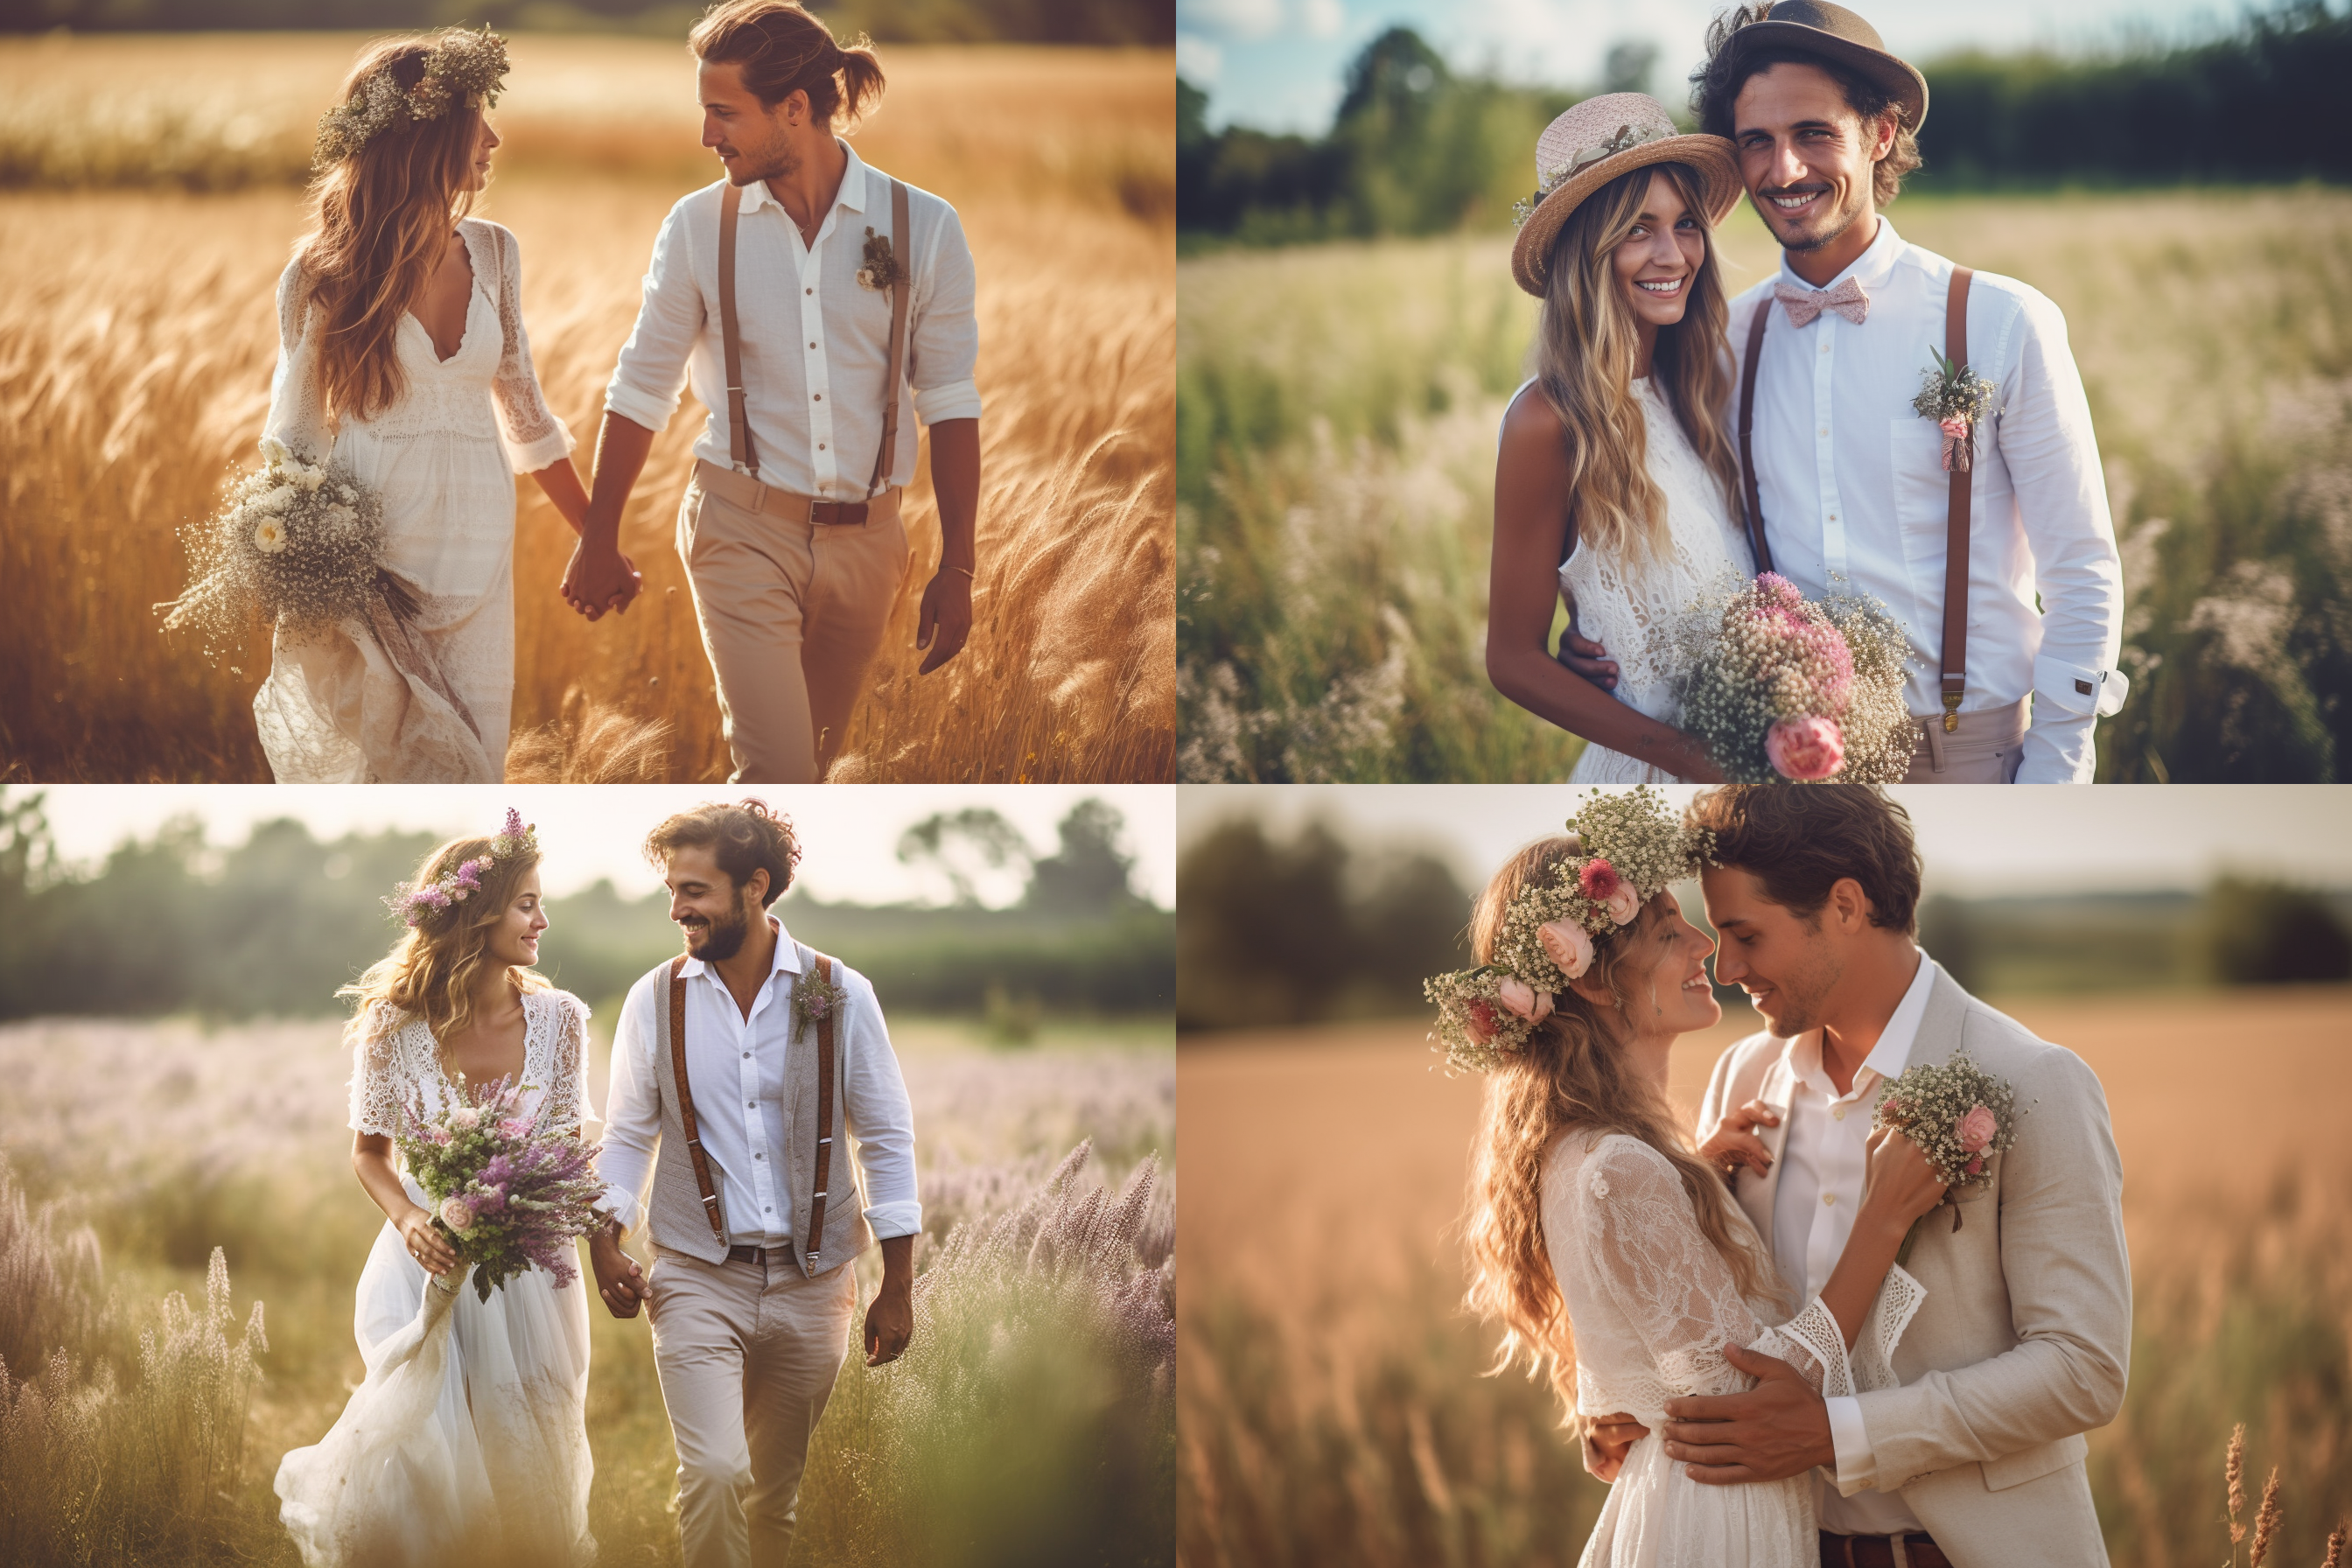 How to Become a Successful Wedding Photographer